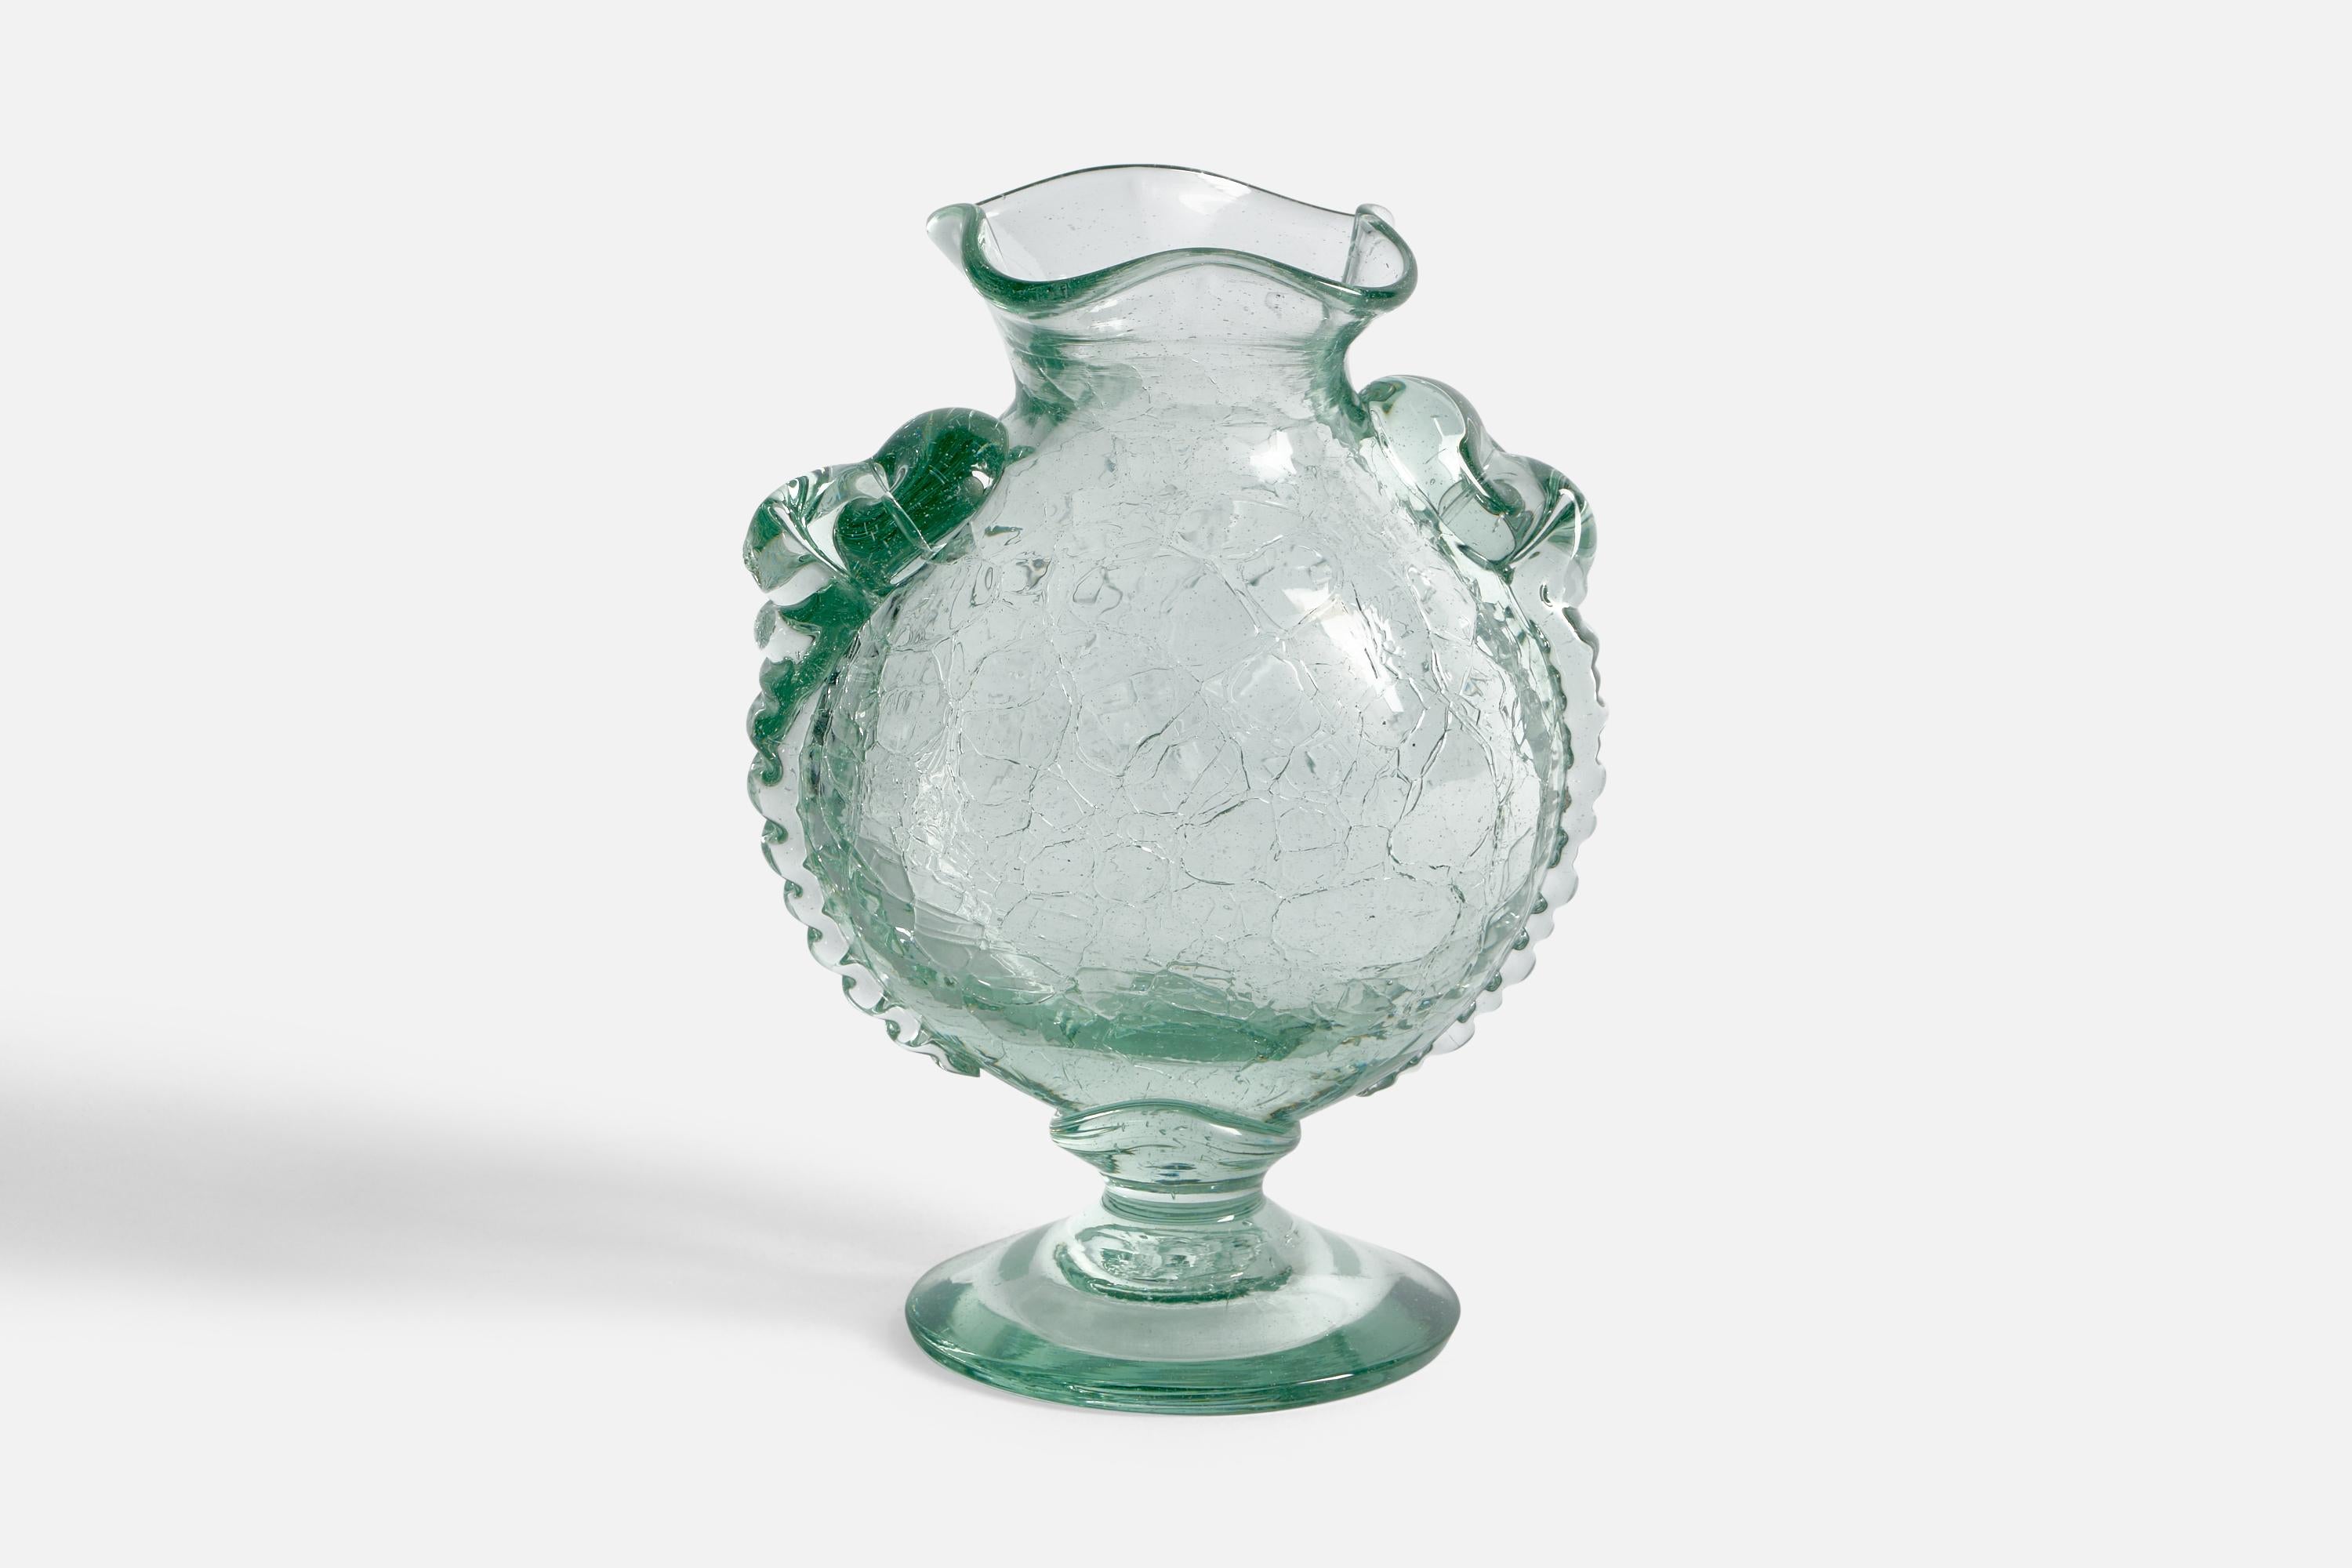 A blown glass vase designed by Ture Berglund and produced by Skansens Glasbruk, Sweden, 1940s.